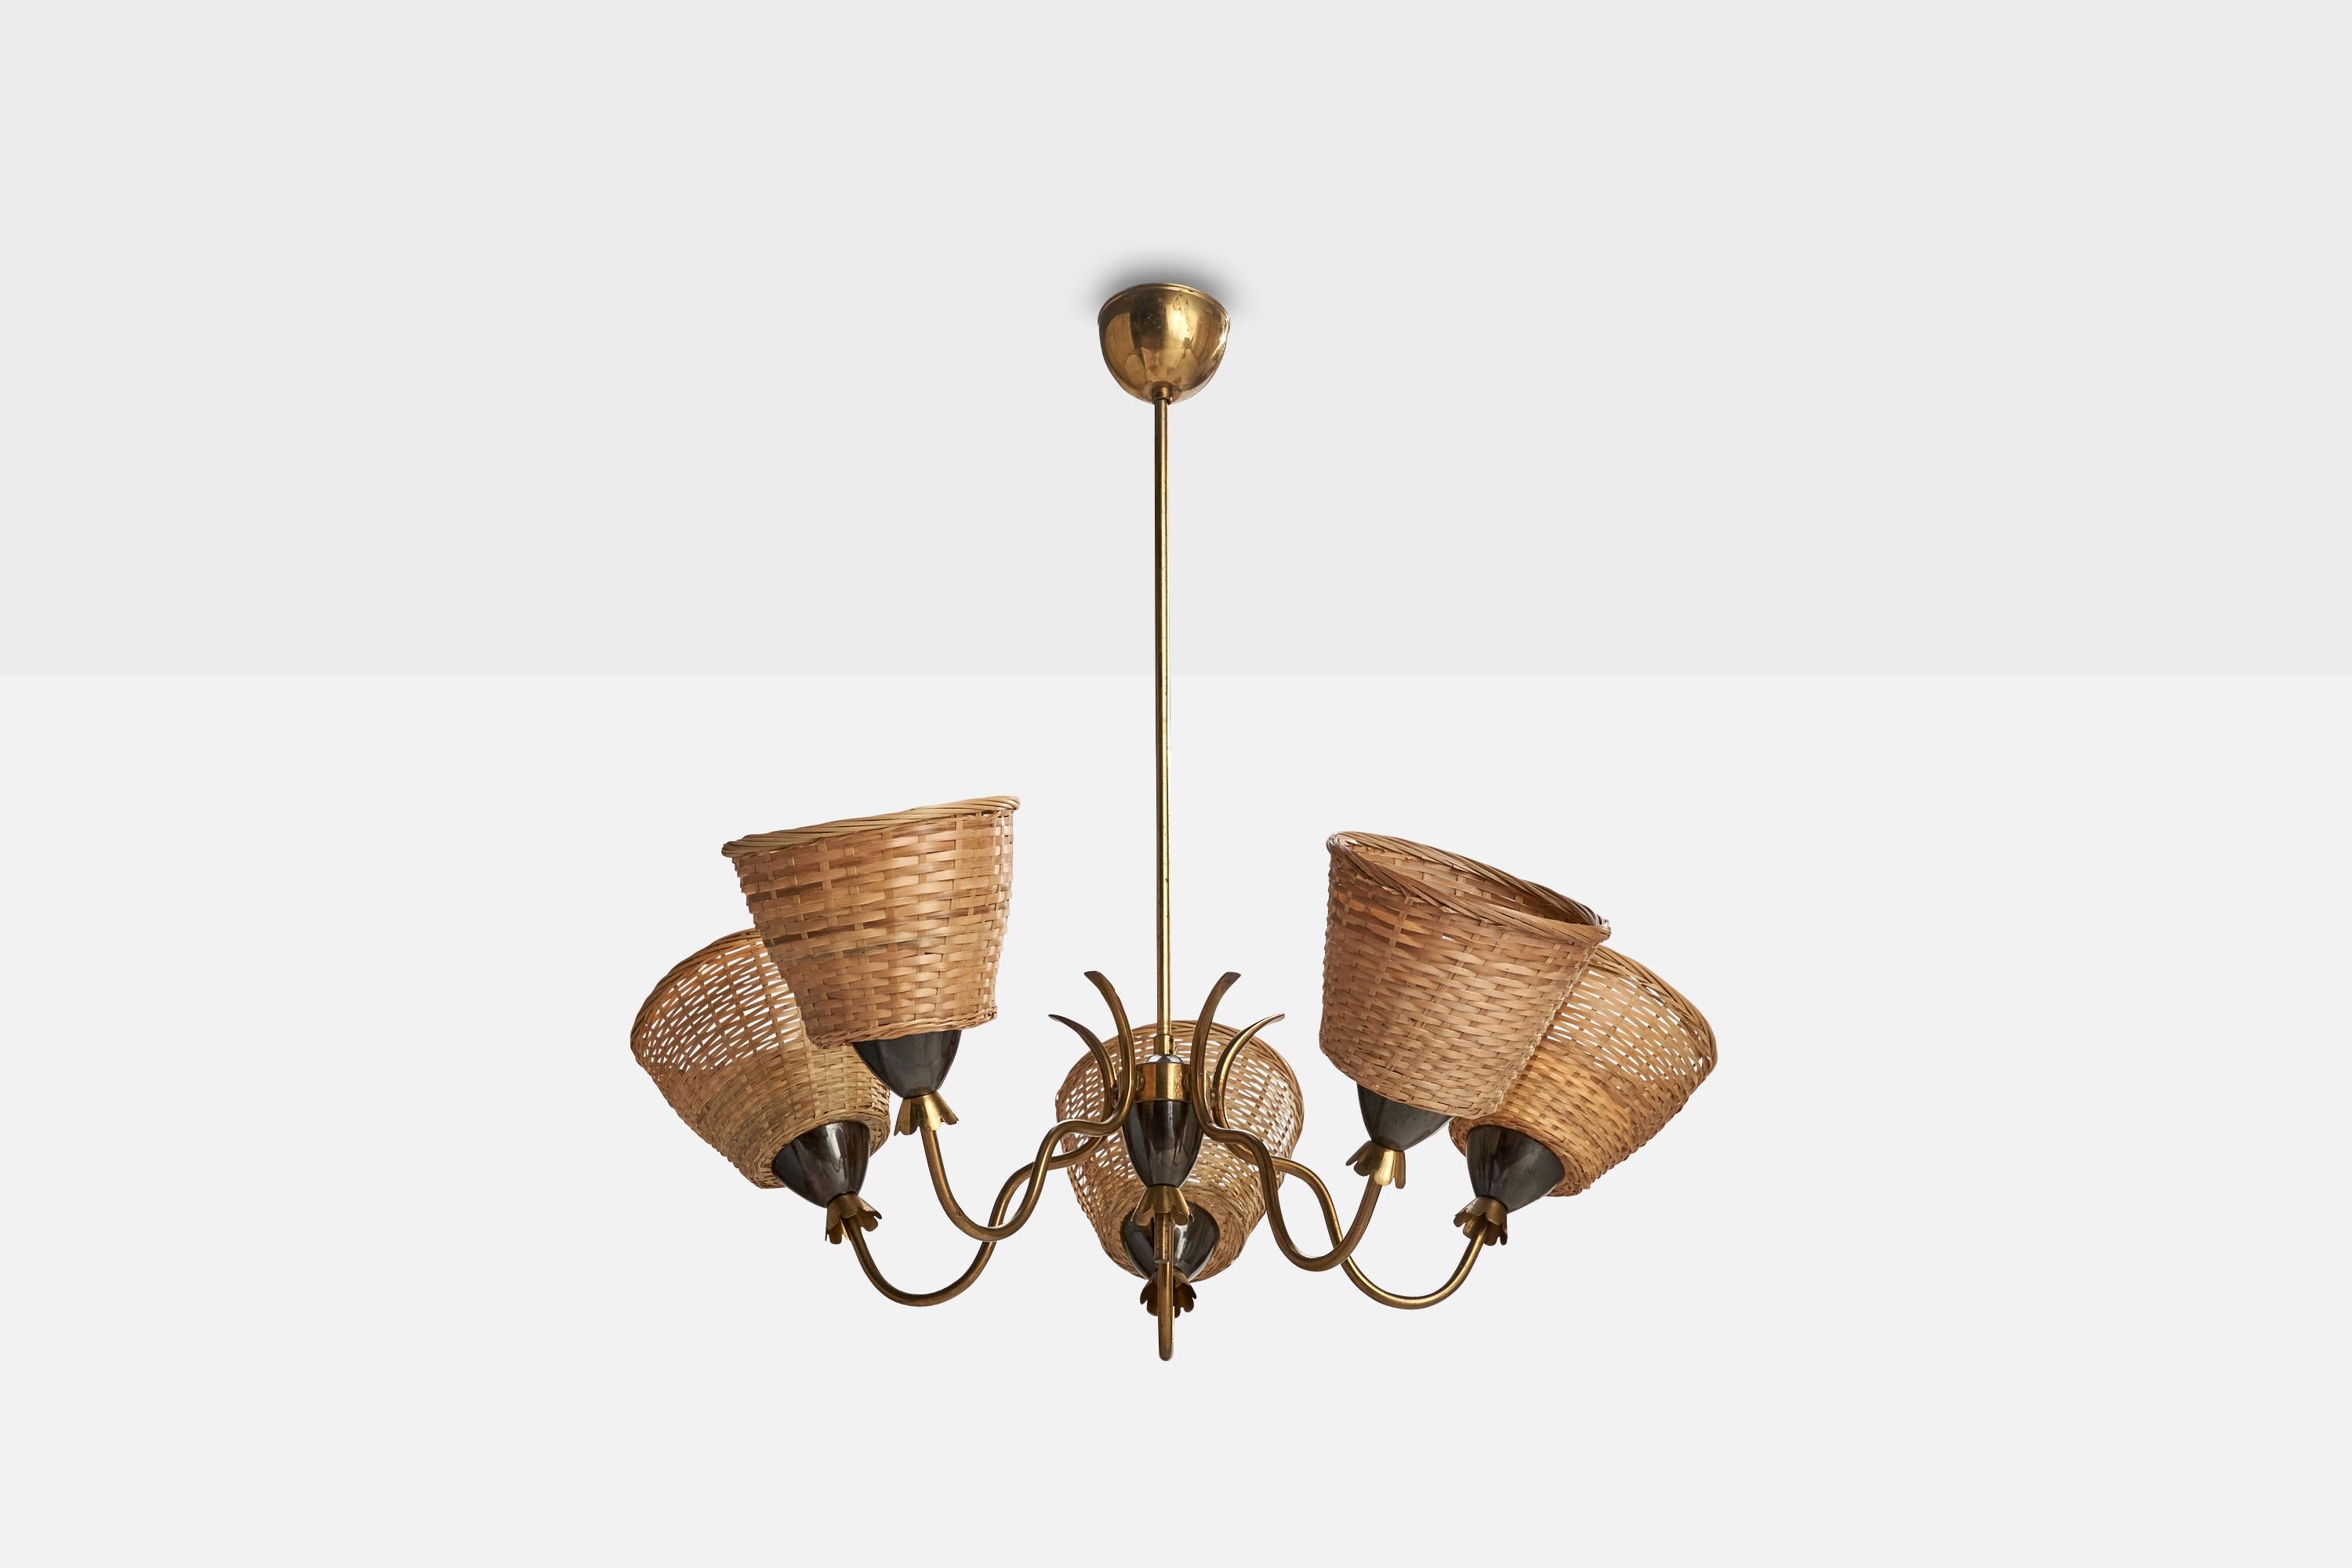 A brass, metal and rattan chandelier designed and produced in Sweden, c. 1950s. 

Dimensions of canopy (inches): 3.67” H x 2.77” Diameter
Socket takes standard E-26 bulbs. 5 socket.There is no maximum wattage stated on the fixture. All lighting will